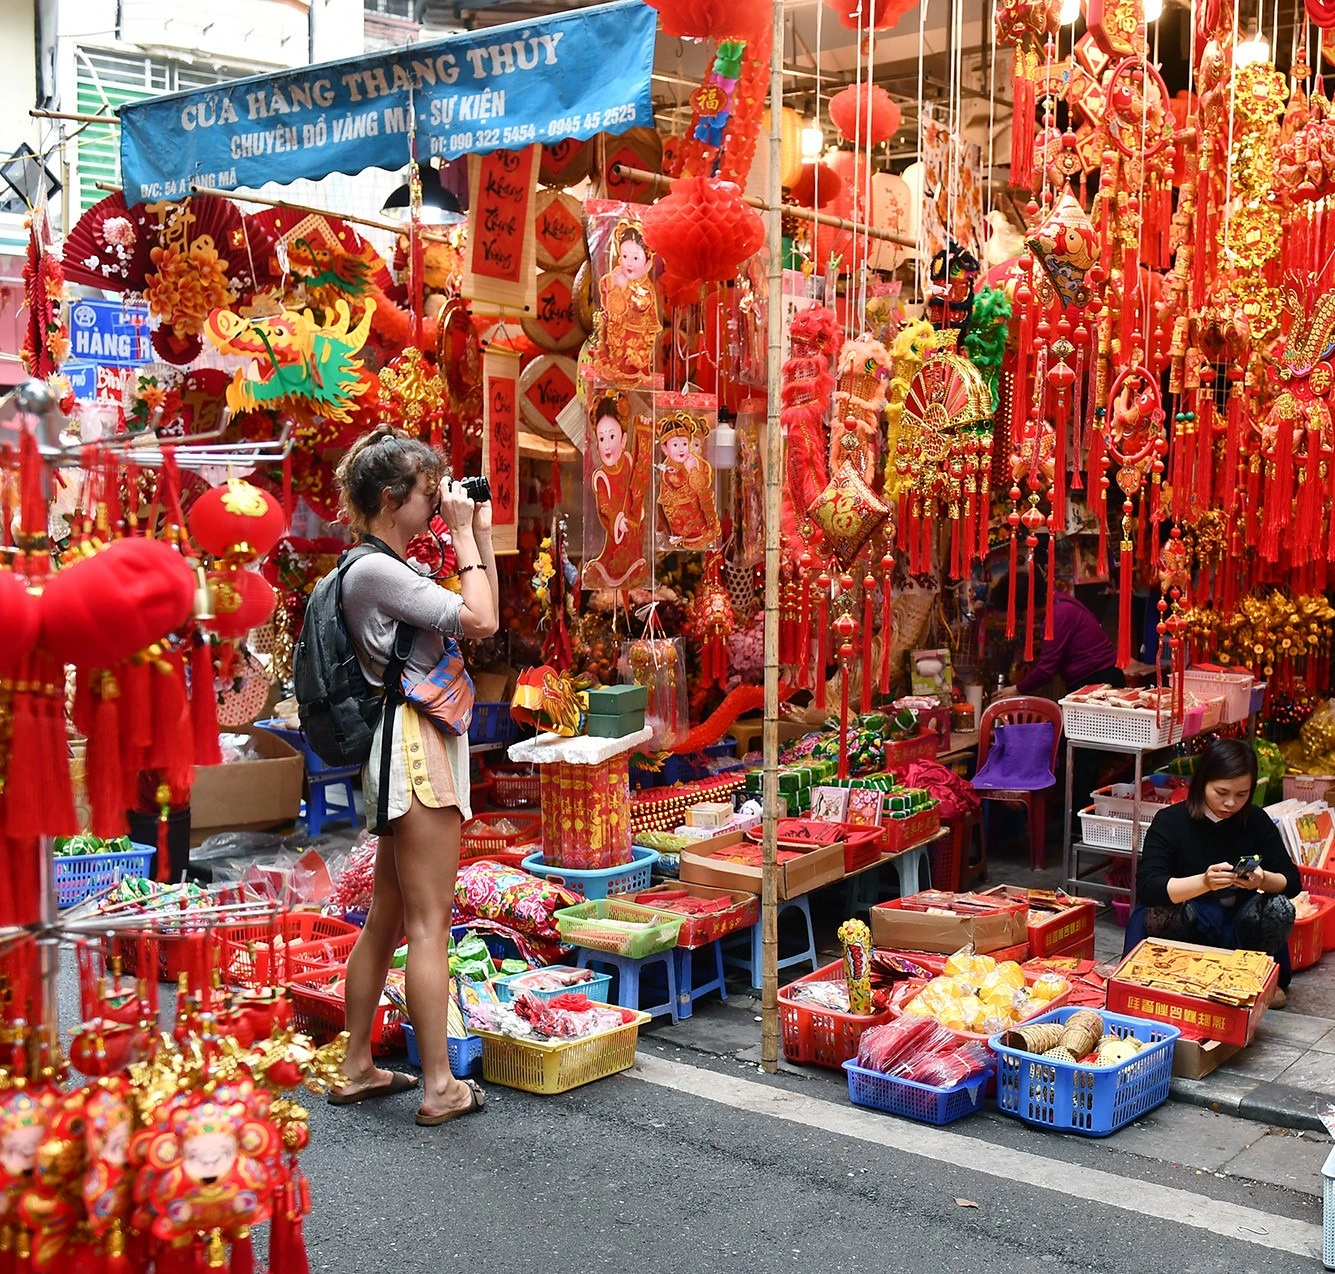 Western customers, we flock to Hang Comb flower market every year only open 1 time on the occasion of Tet